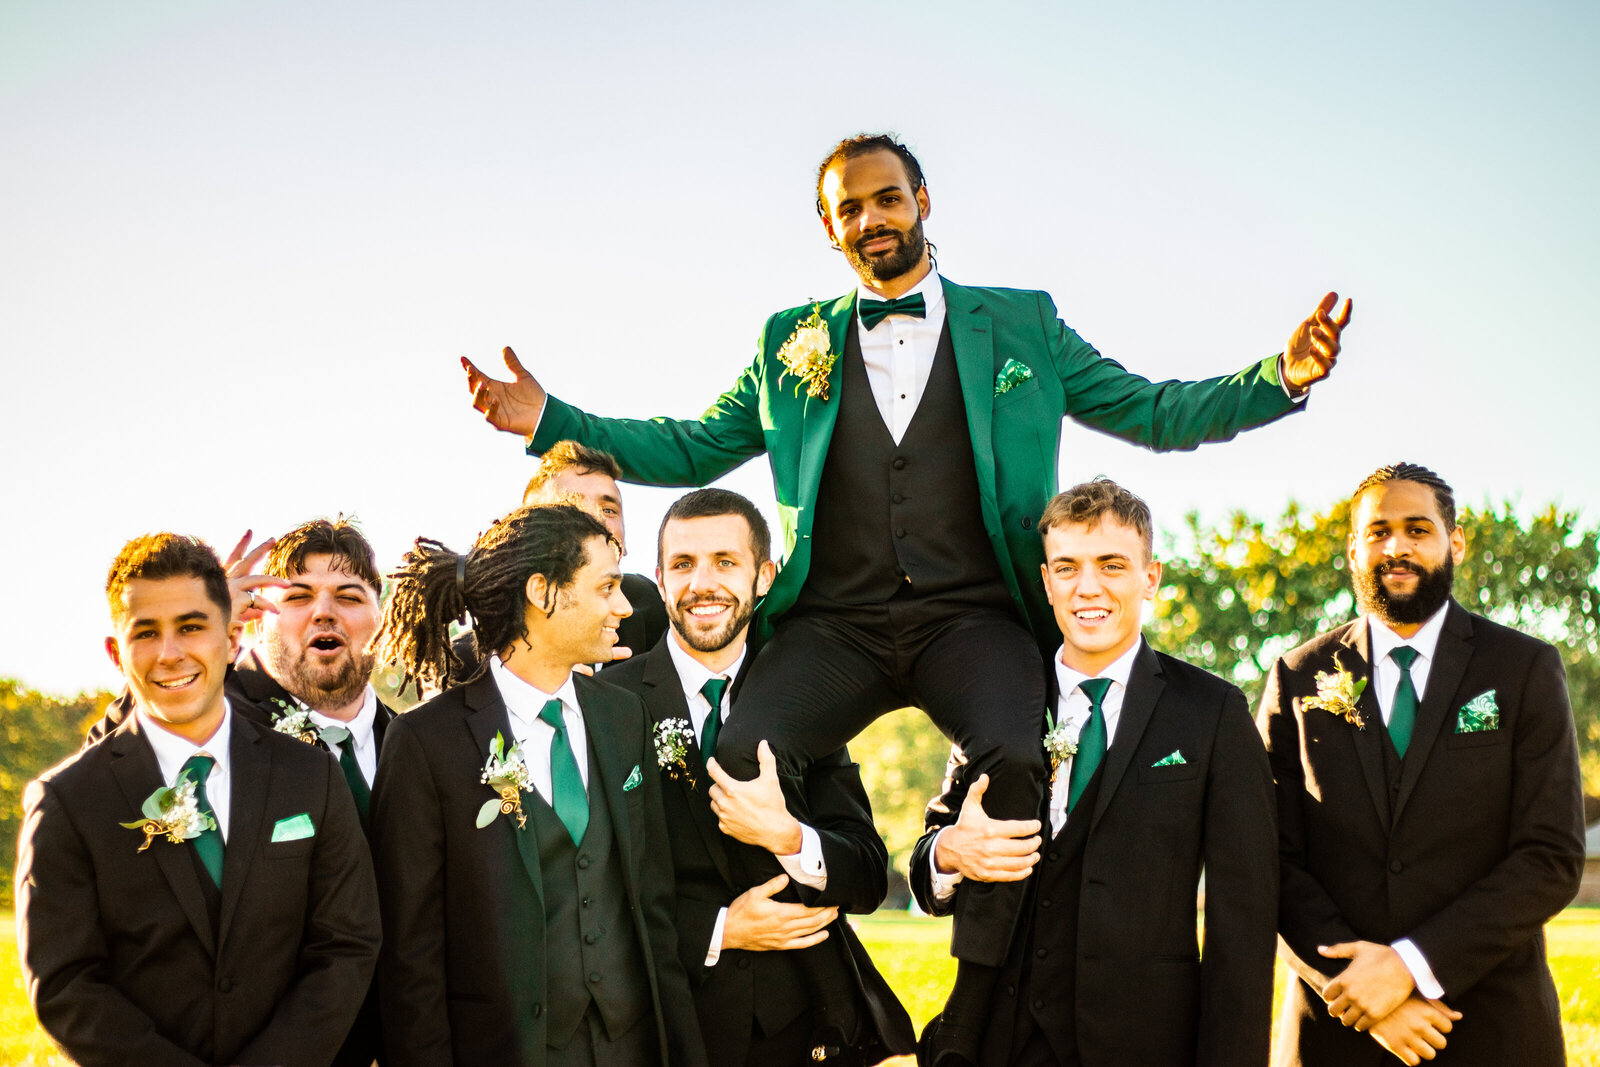 Groom and groomsmen fun photos at sunset. Photo by Devin Ramon Photography.